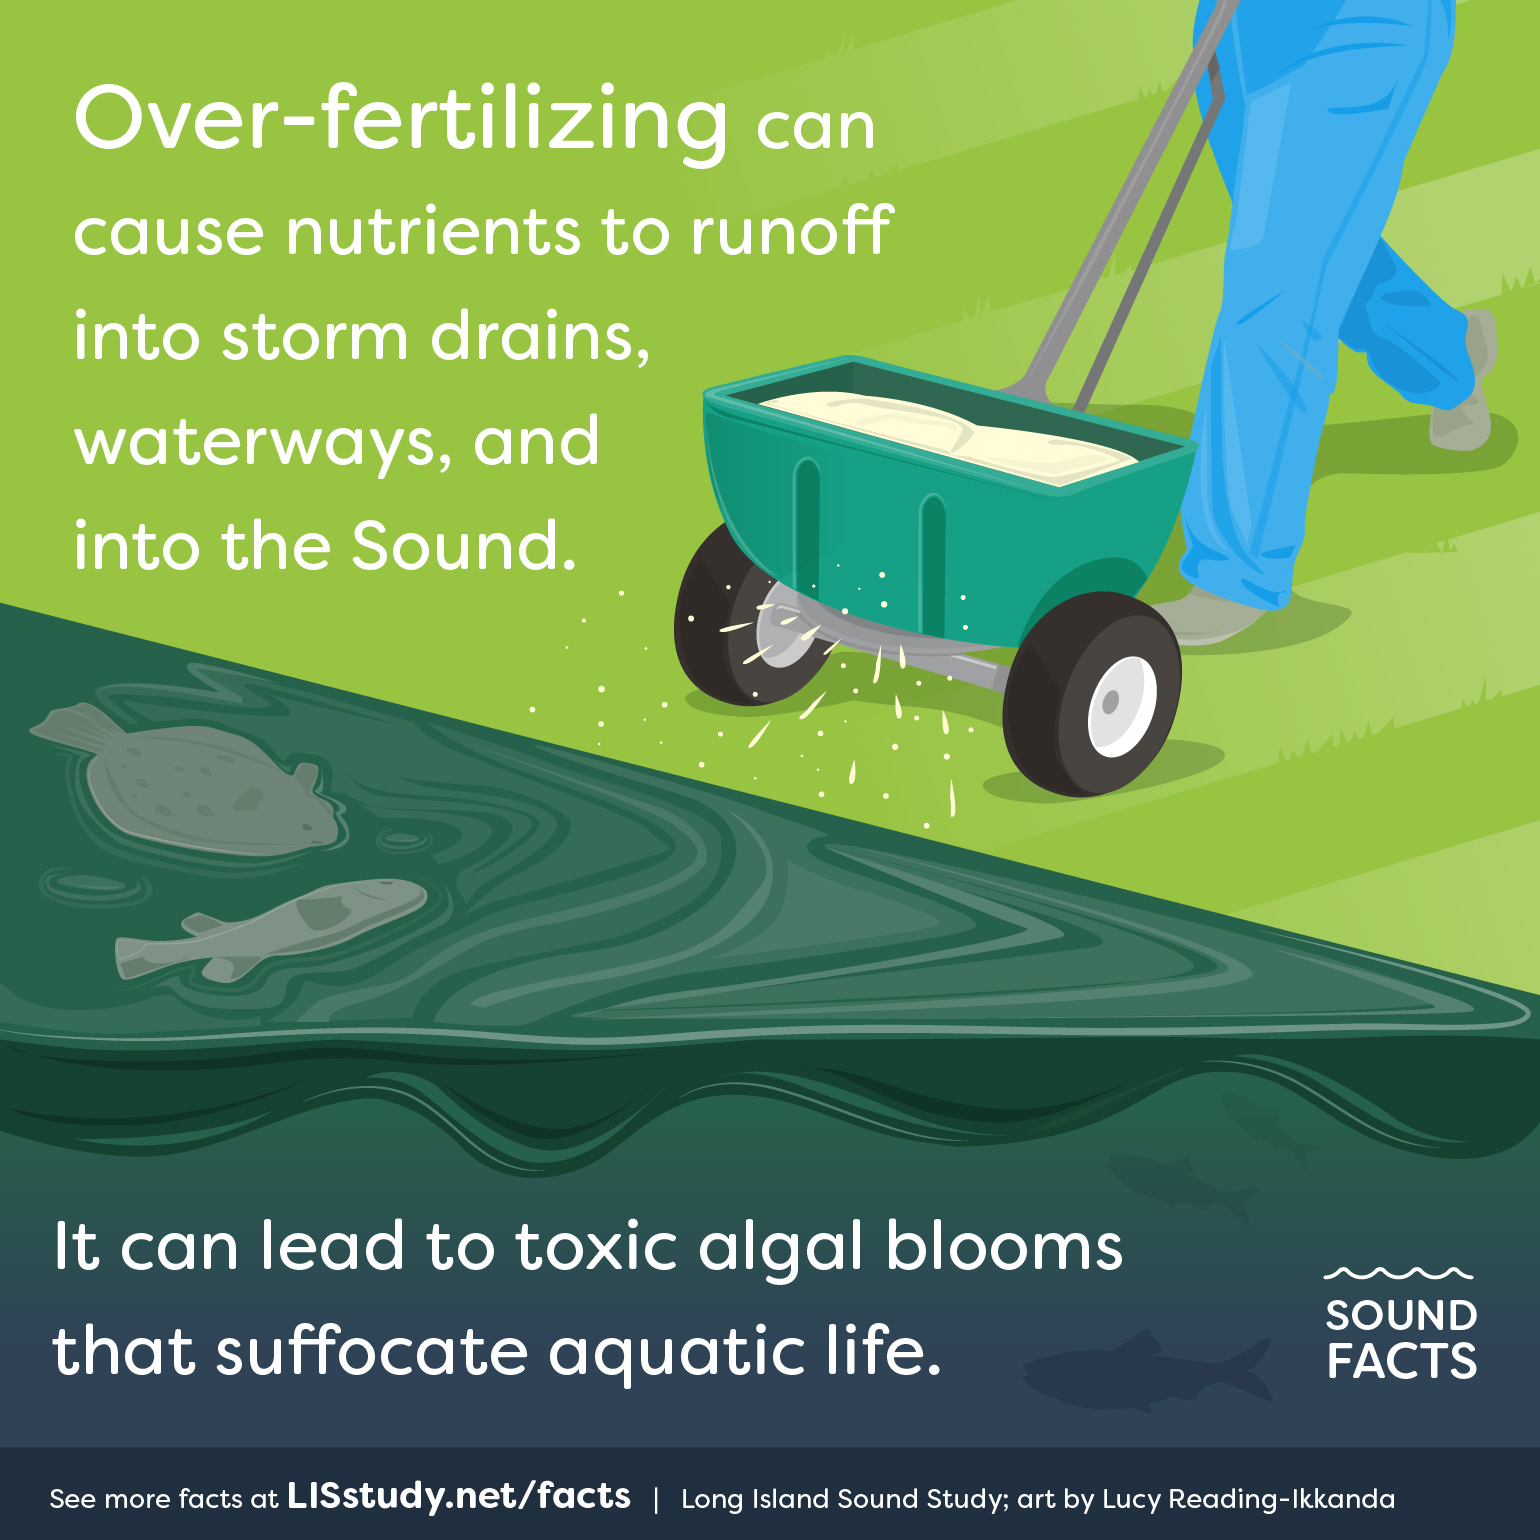 An illustration of someone fertilizing their lawn, and the fertilizer polluting nearby water and killing fish.